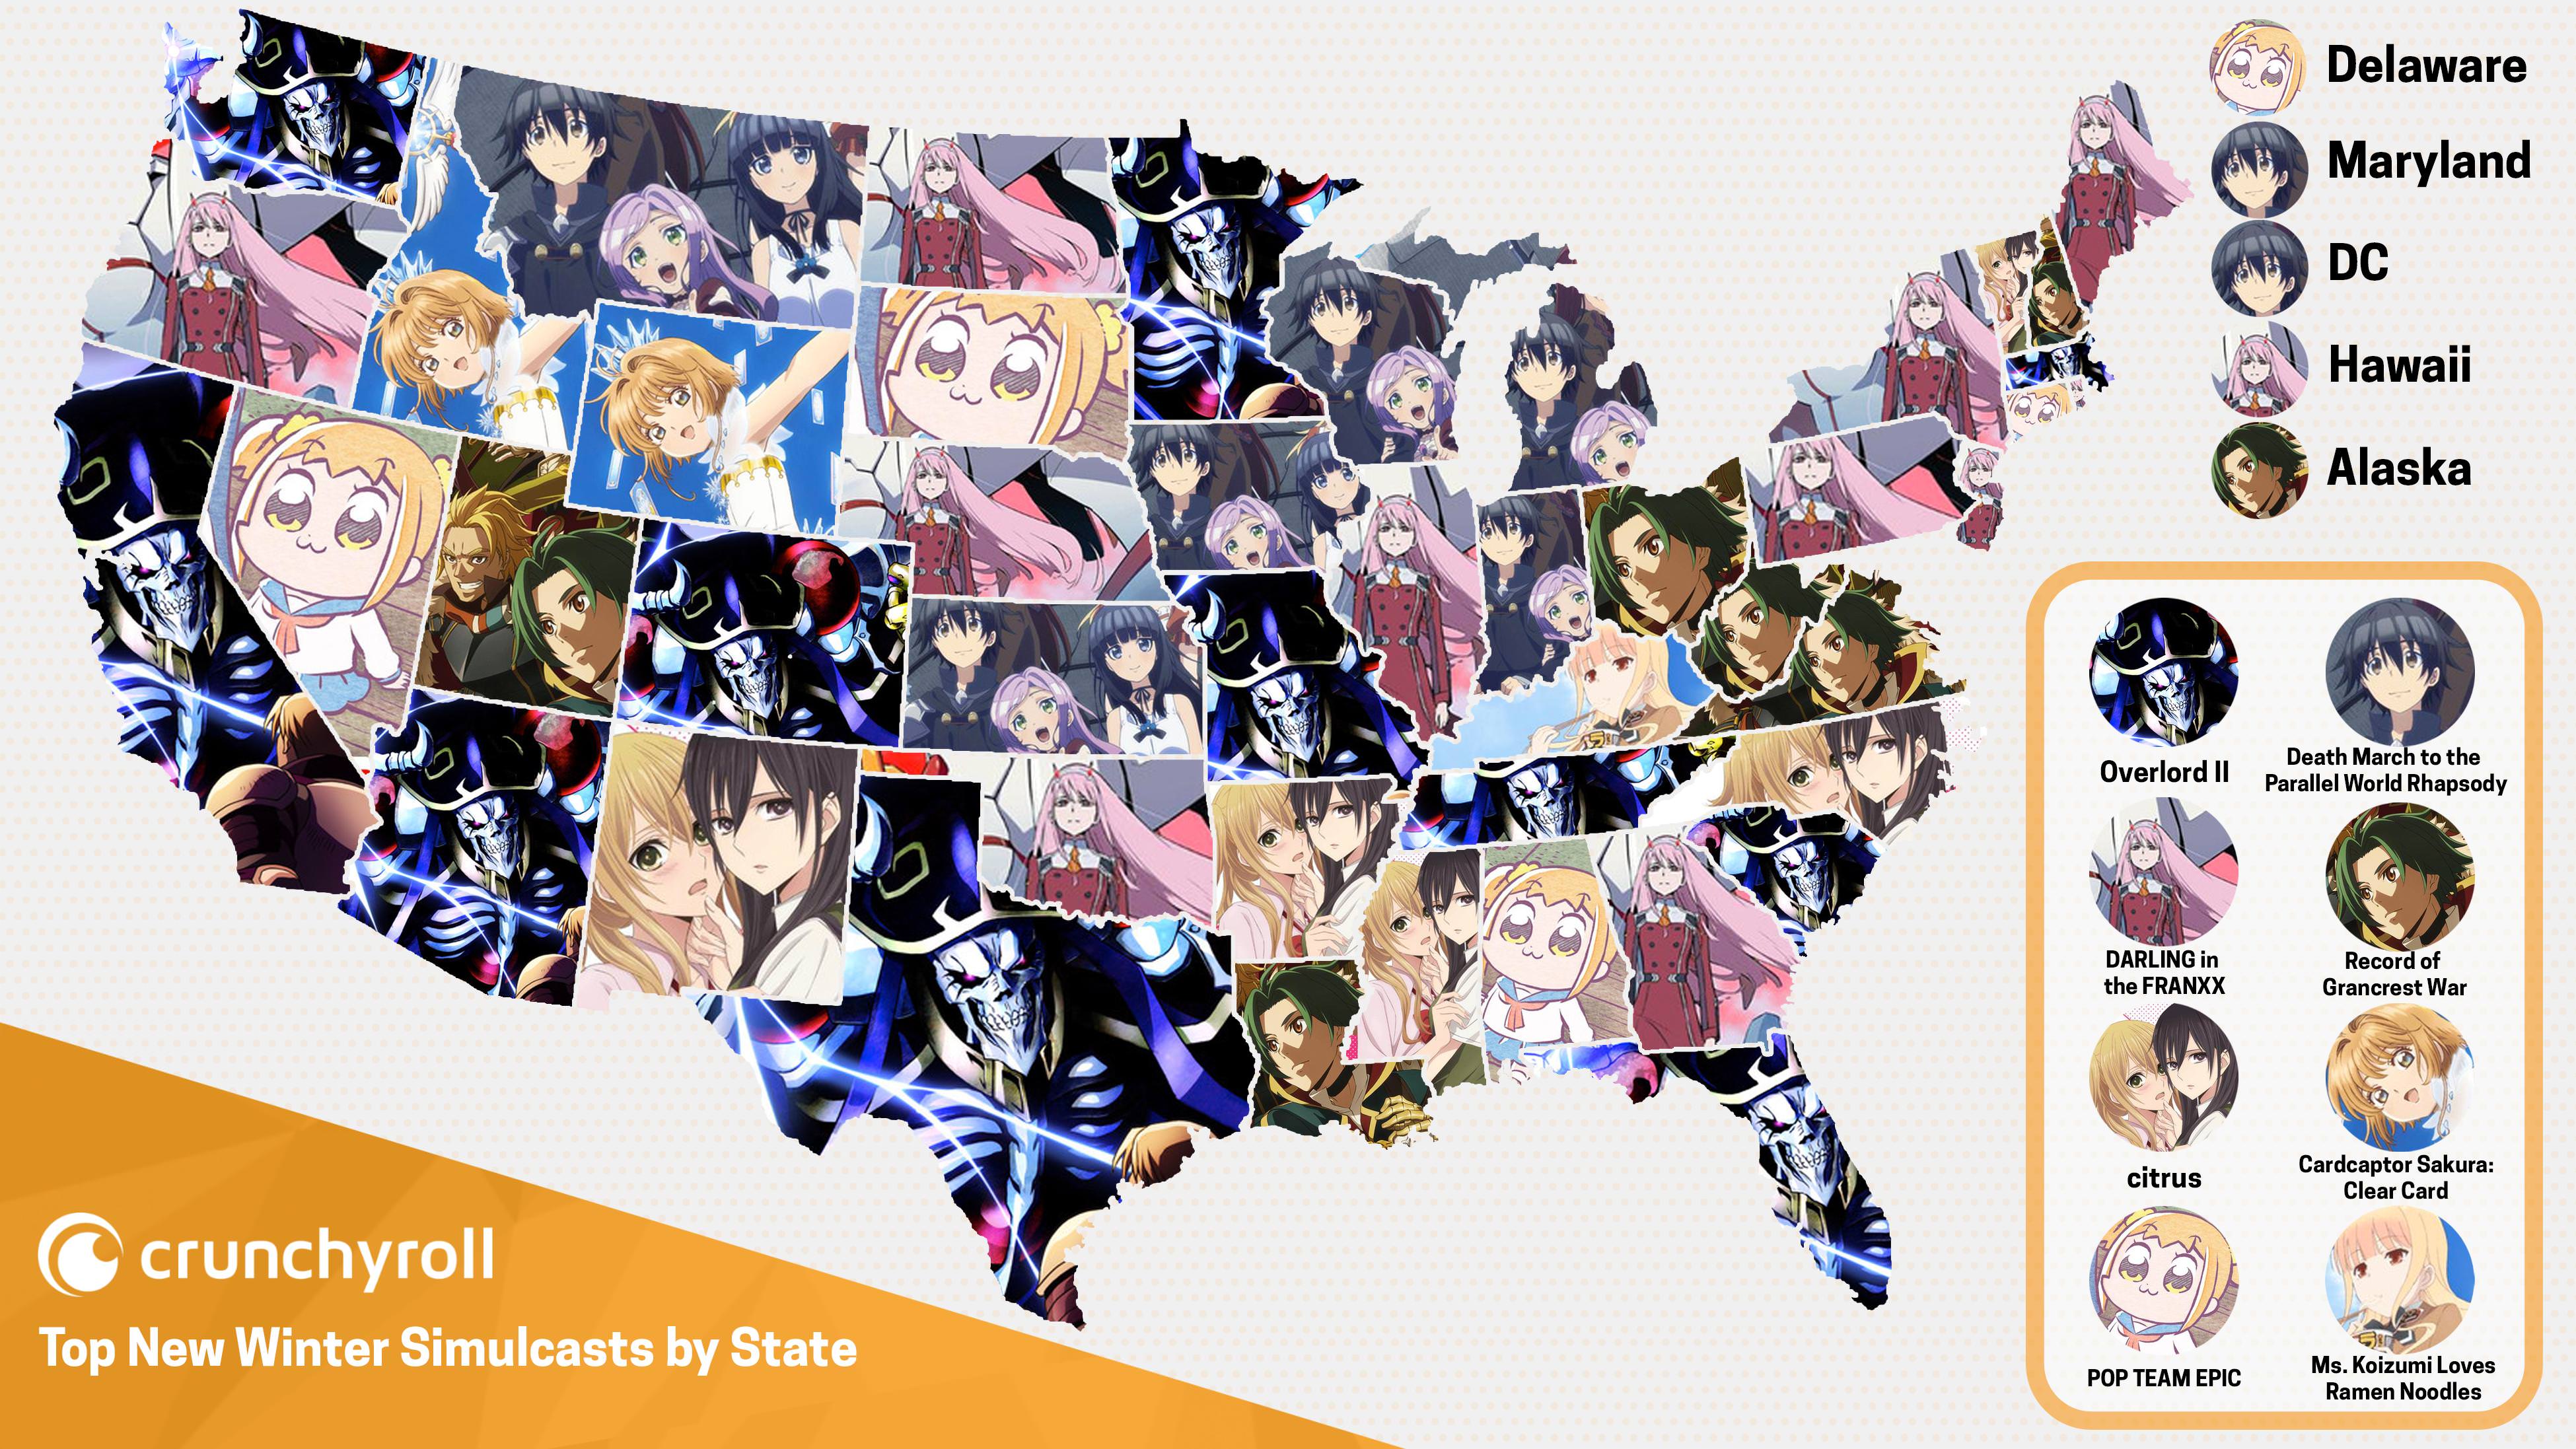 [UPDATE 20180210] Crunchyroll's Most Popular Winter Anime by State